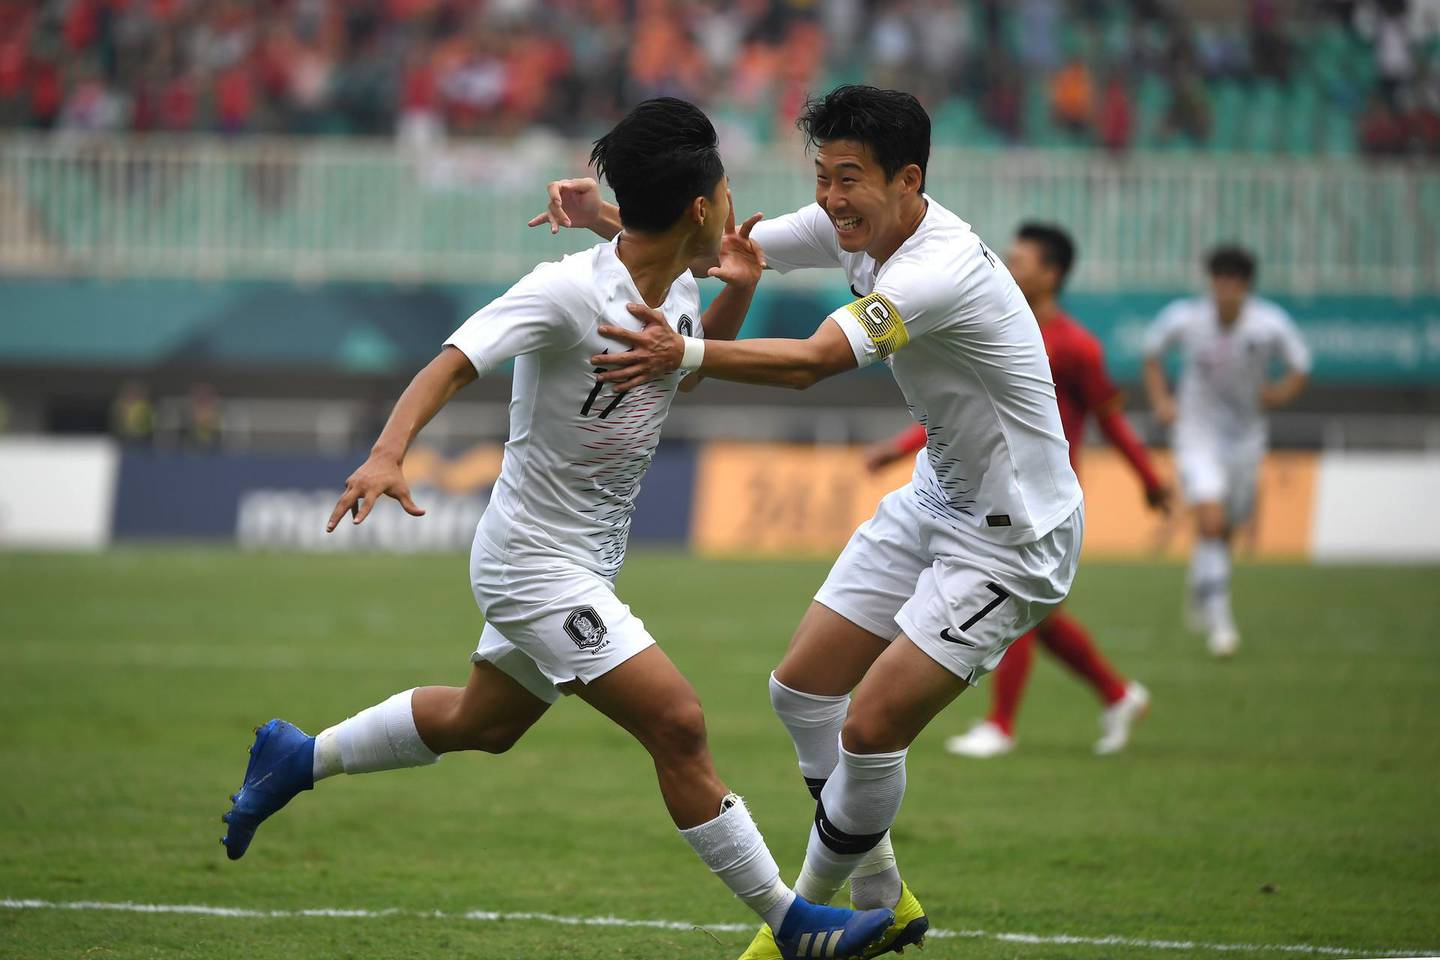 South Korea's Lee Seung-woo (L) celebrates with teammate Son Heung-min (R) after scoring during the men's football semi-final match between Vietnam and South Korea at the 2018 Asian Games in Bogor on August 29, 2018. (Photo by Arief Bagus / AFP)